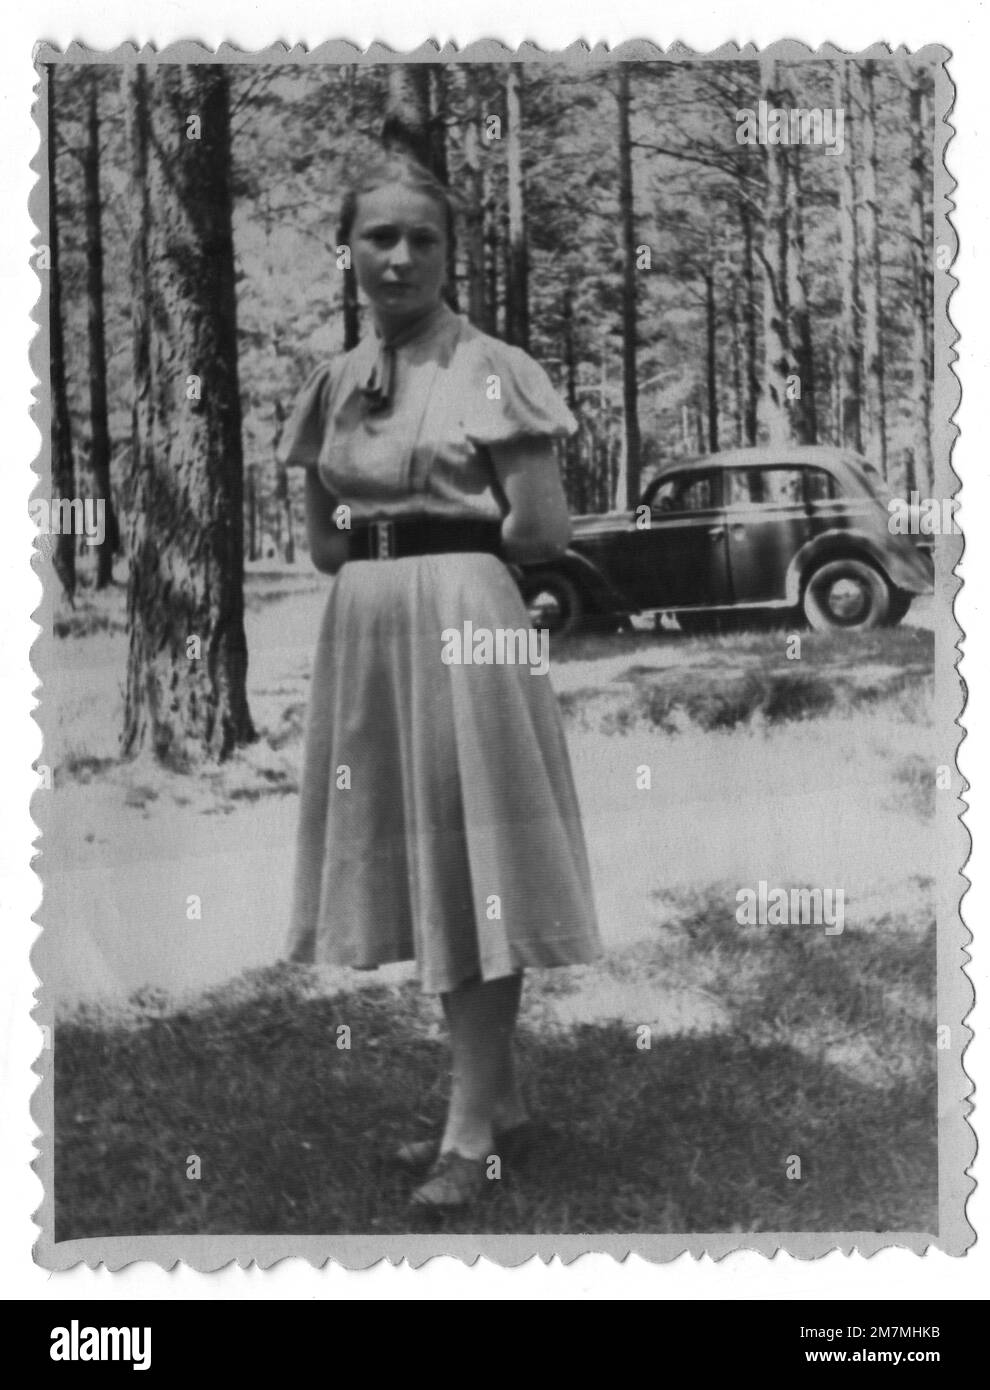 A young girl in the forest against the backdrop of a Moskvich car. Photo taken in 1955. Stock Photo